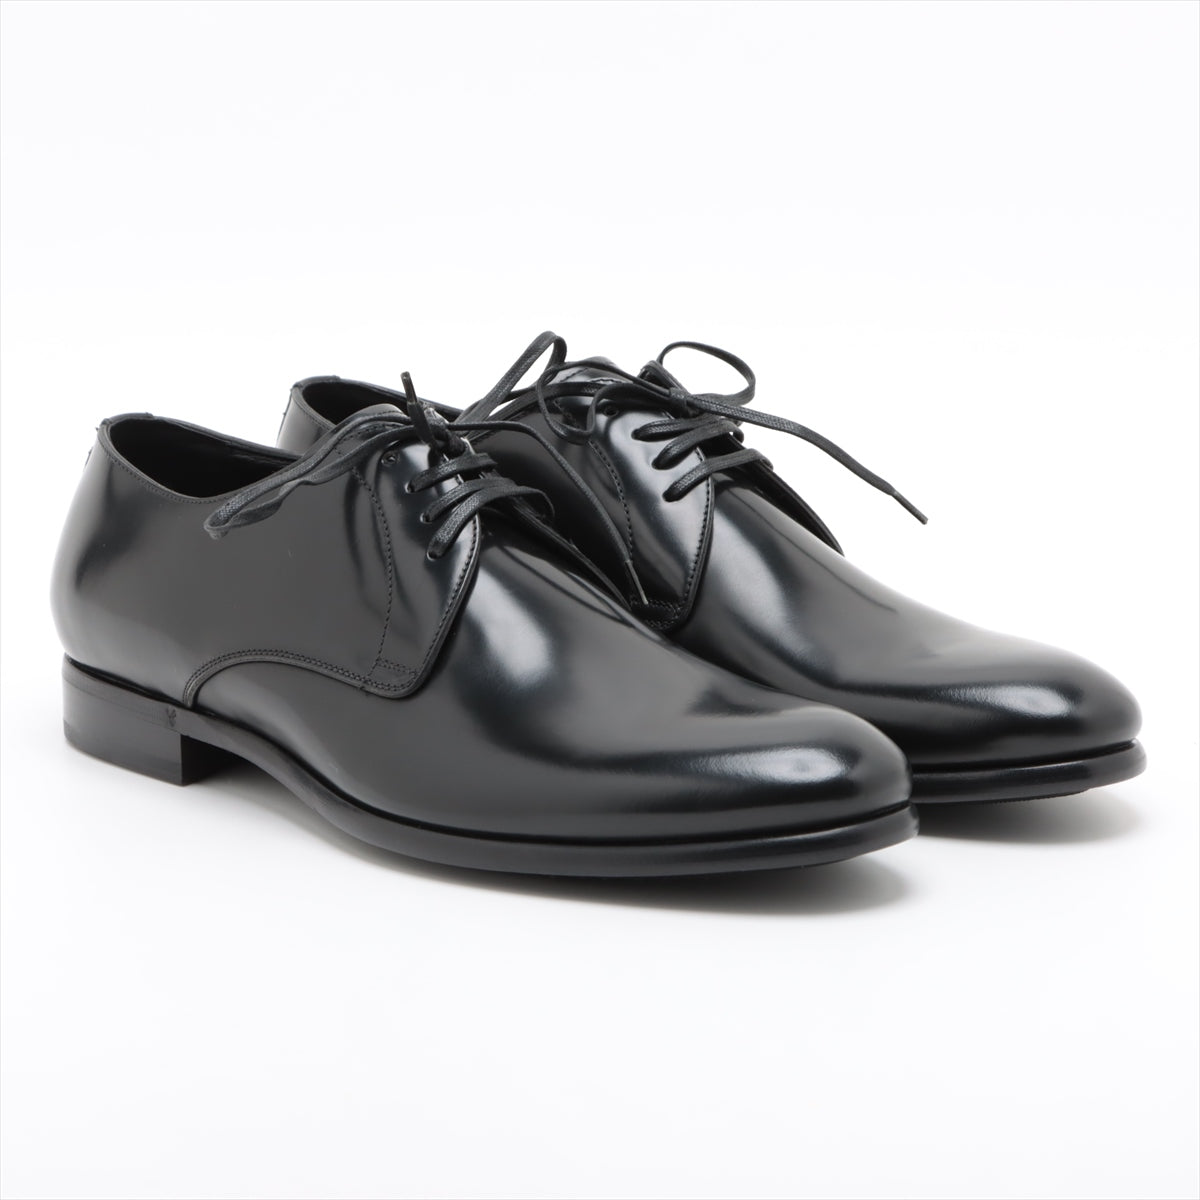 Dolce & Gabbana Leather Dress shoes 8 Men's Black A10086 Is there a replacement string